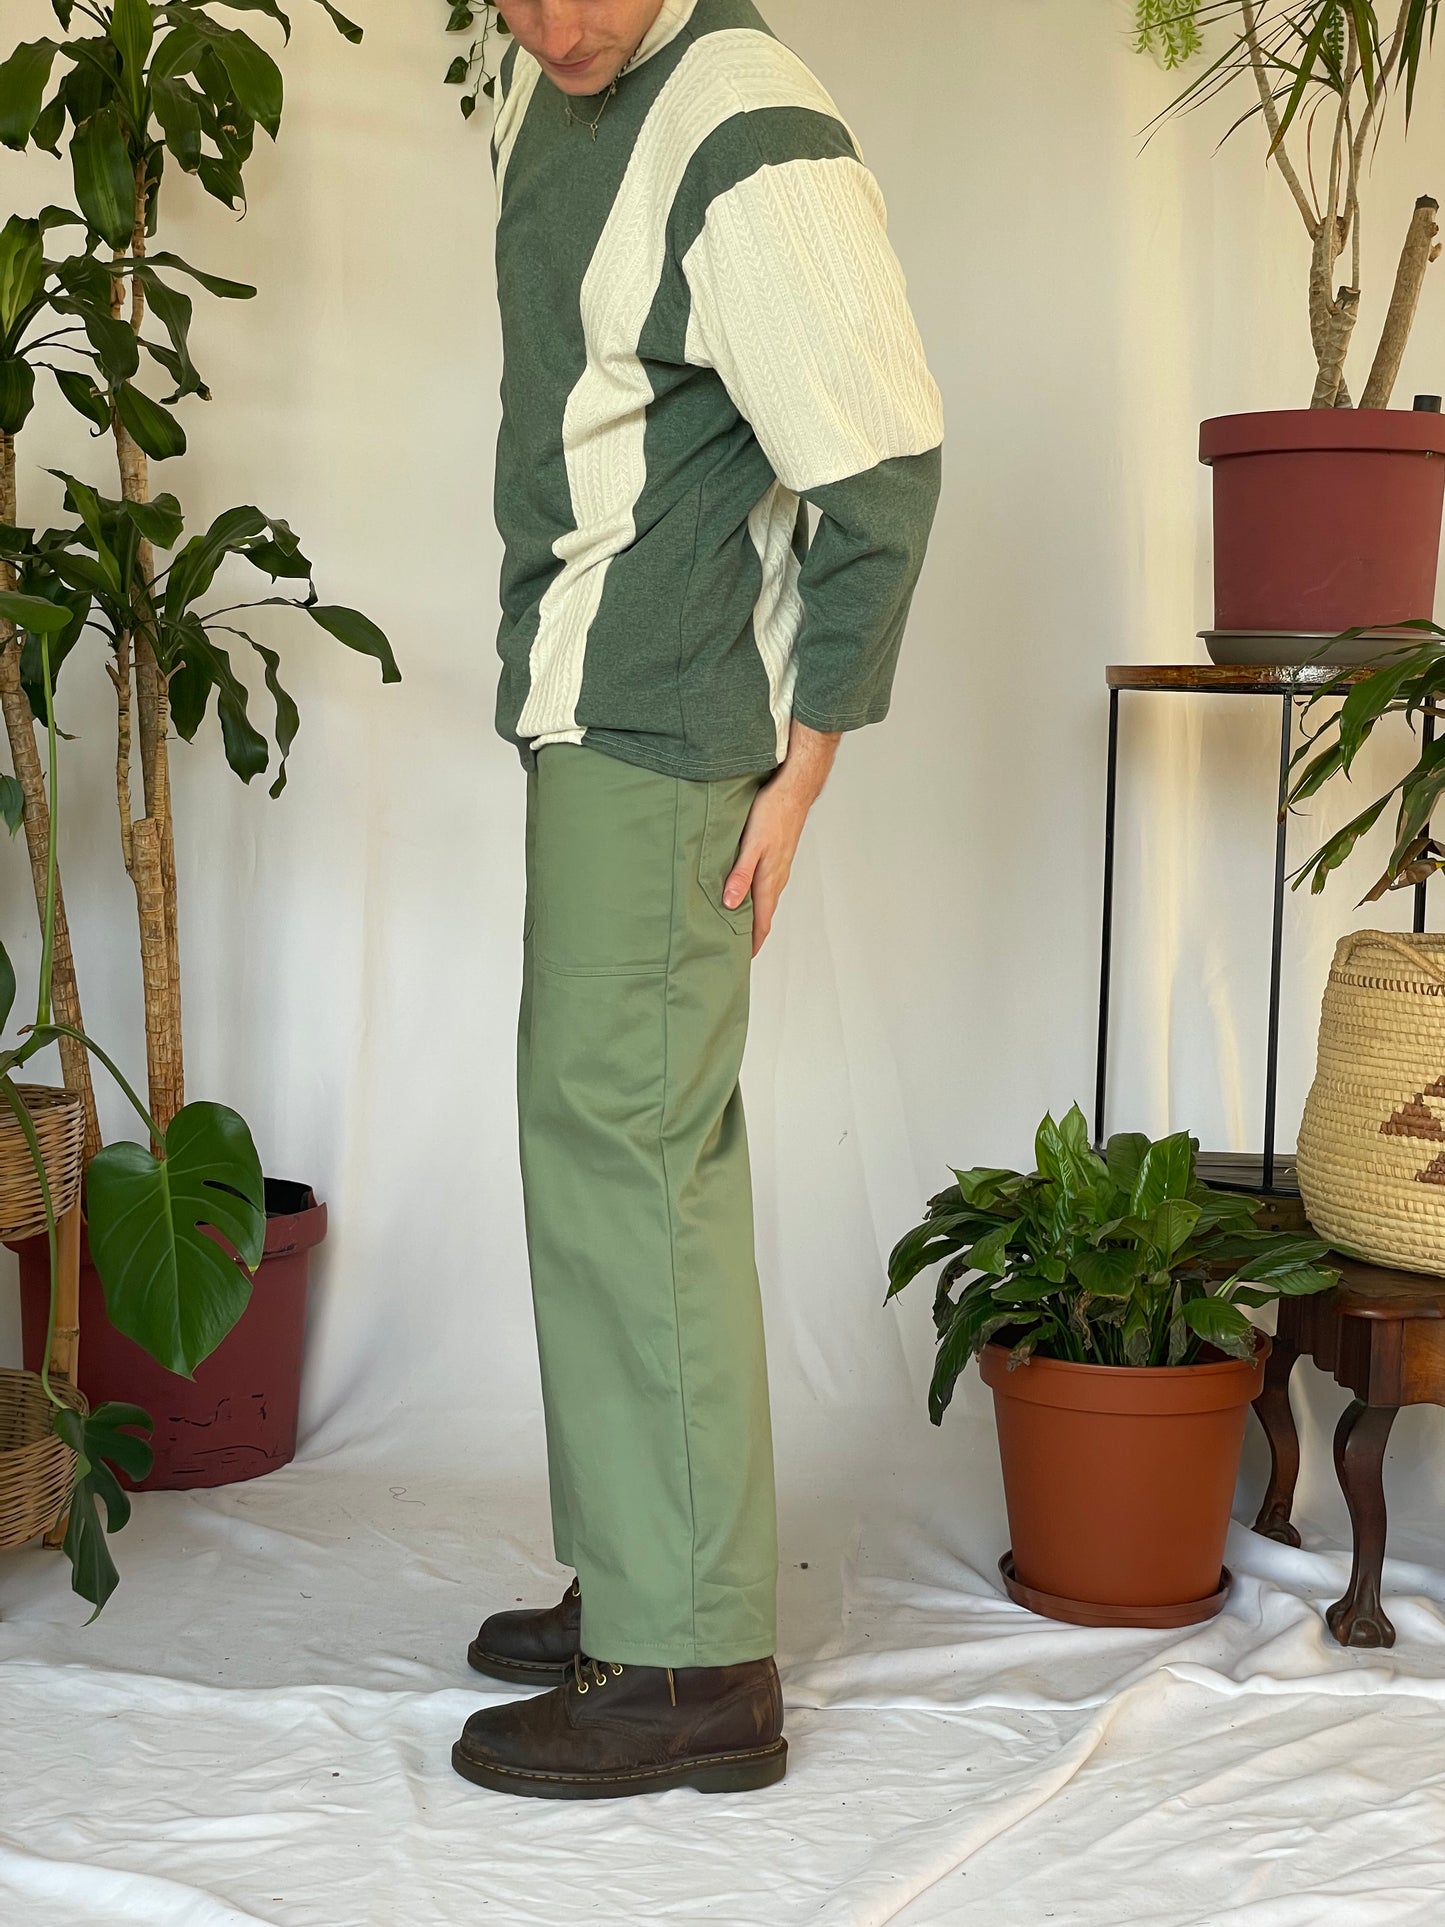 Model wears green pants with a striped jersey and green beanie. Model stands against a white backdrop with plants and hanging foliage. 